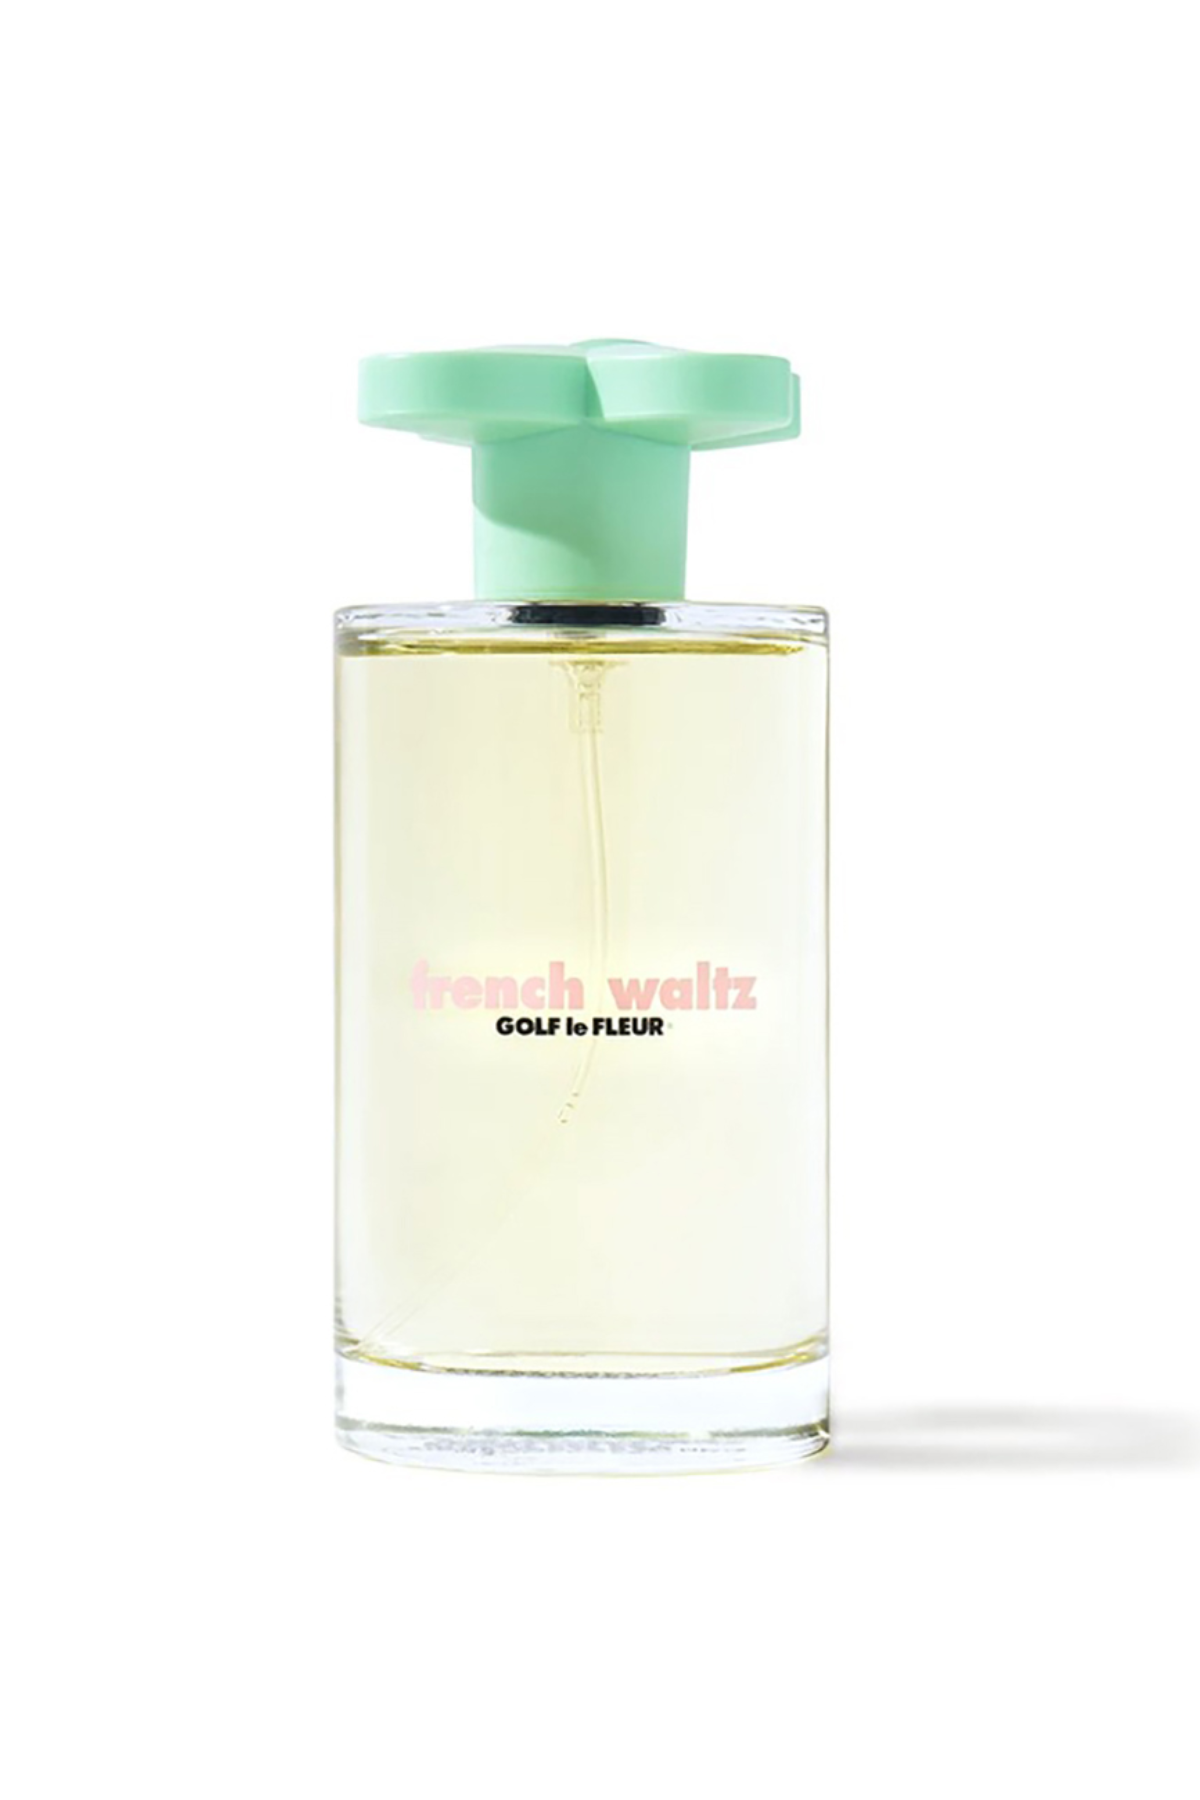 A bottle of GOLF le FLEUR* French Waltz perfume against a white background.